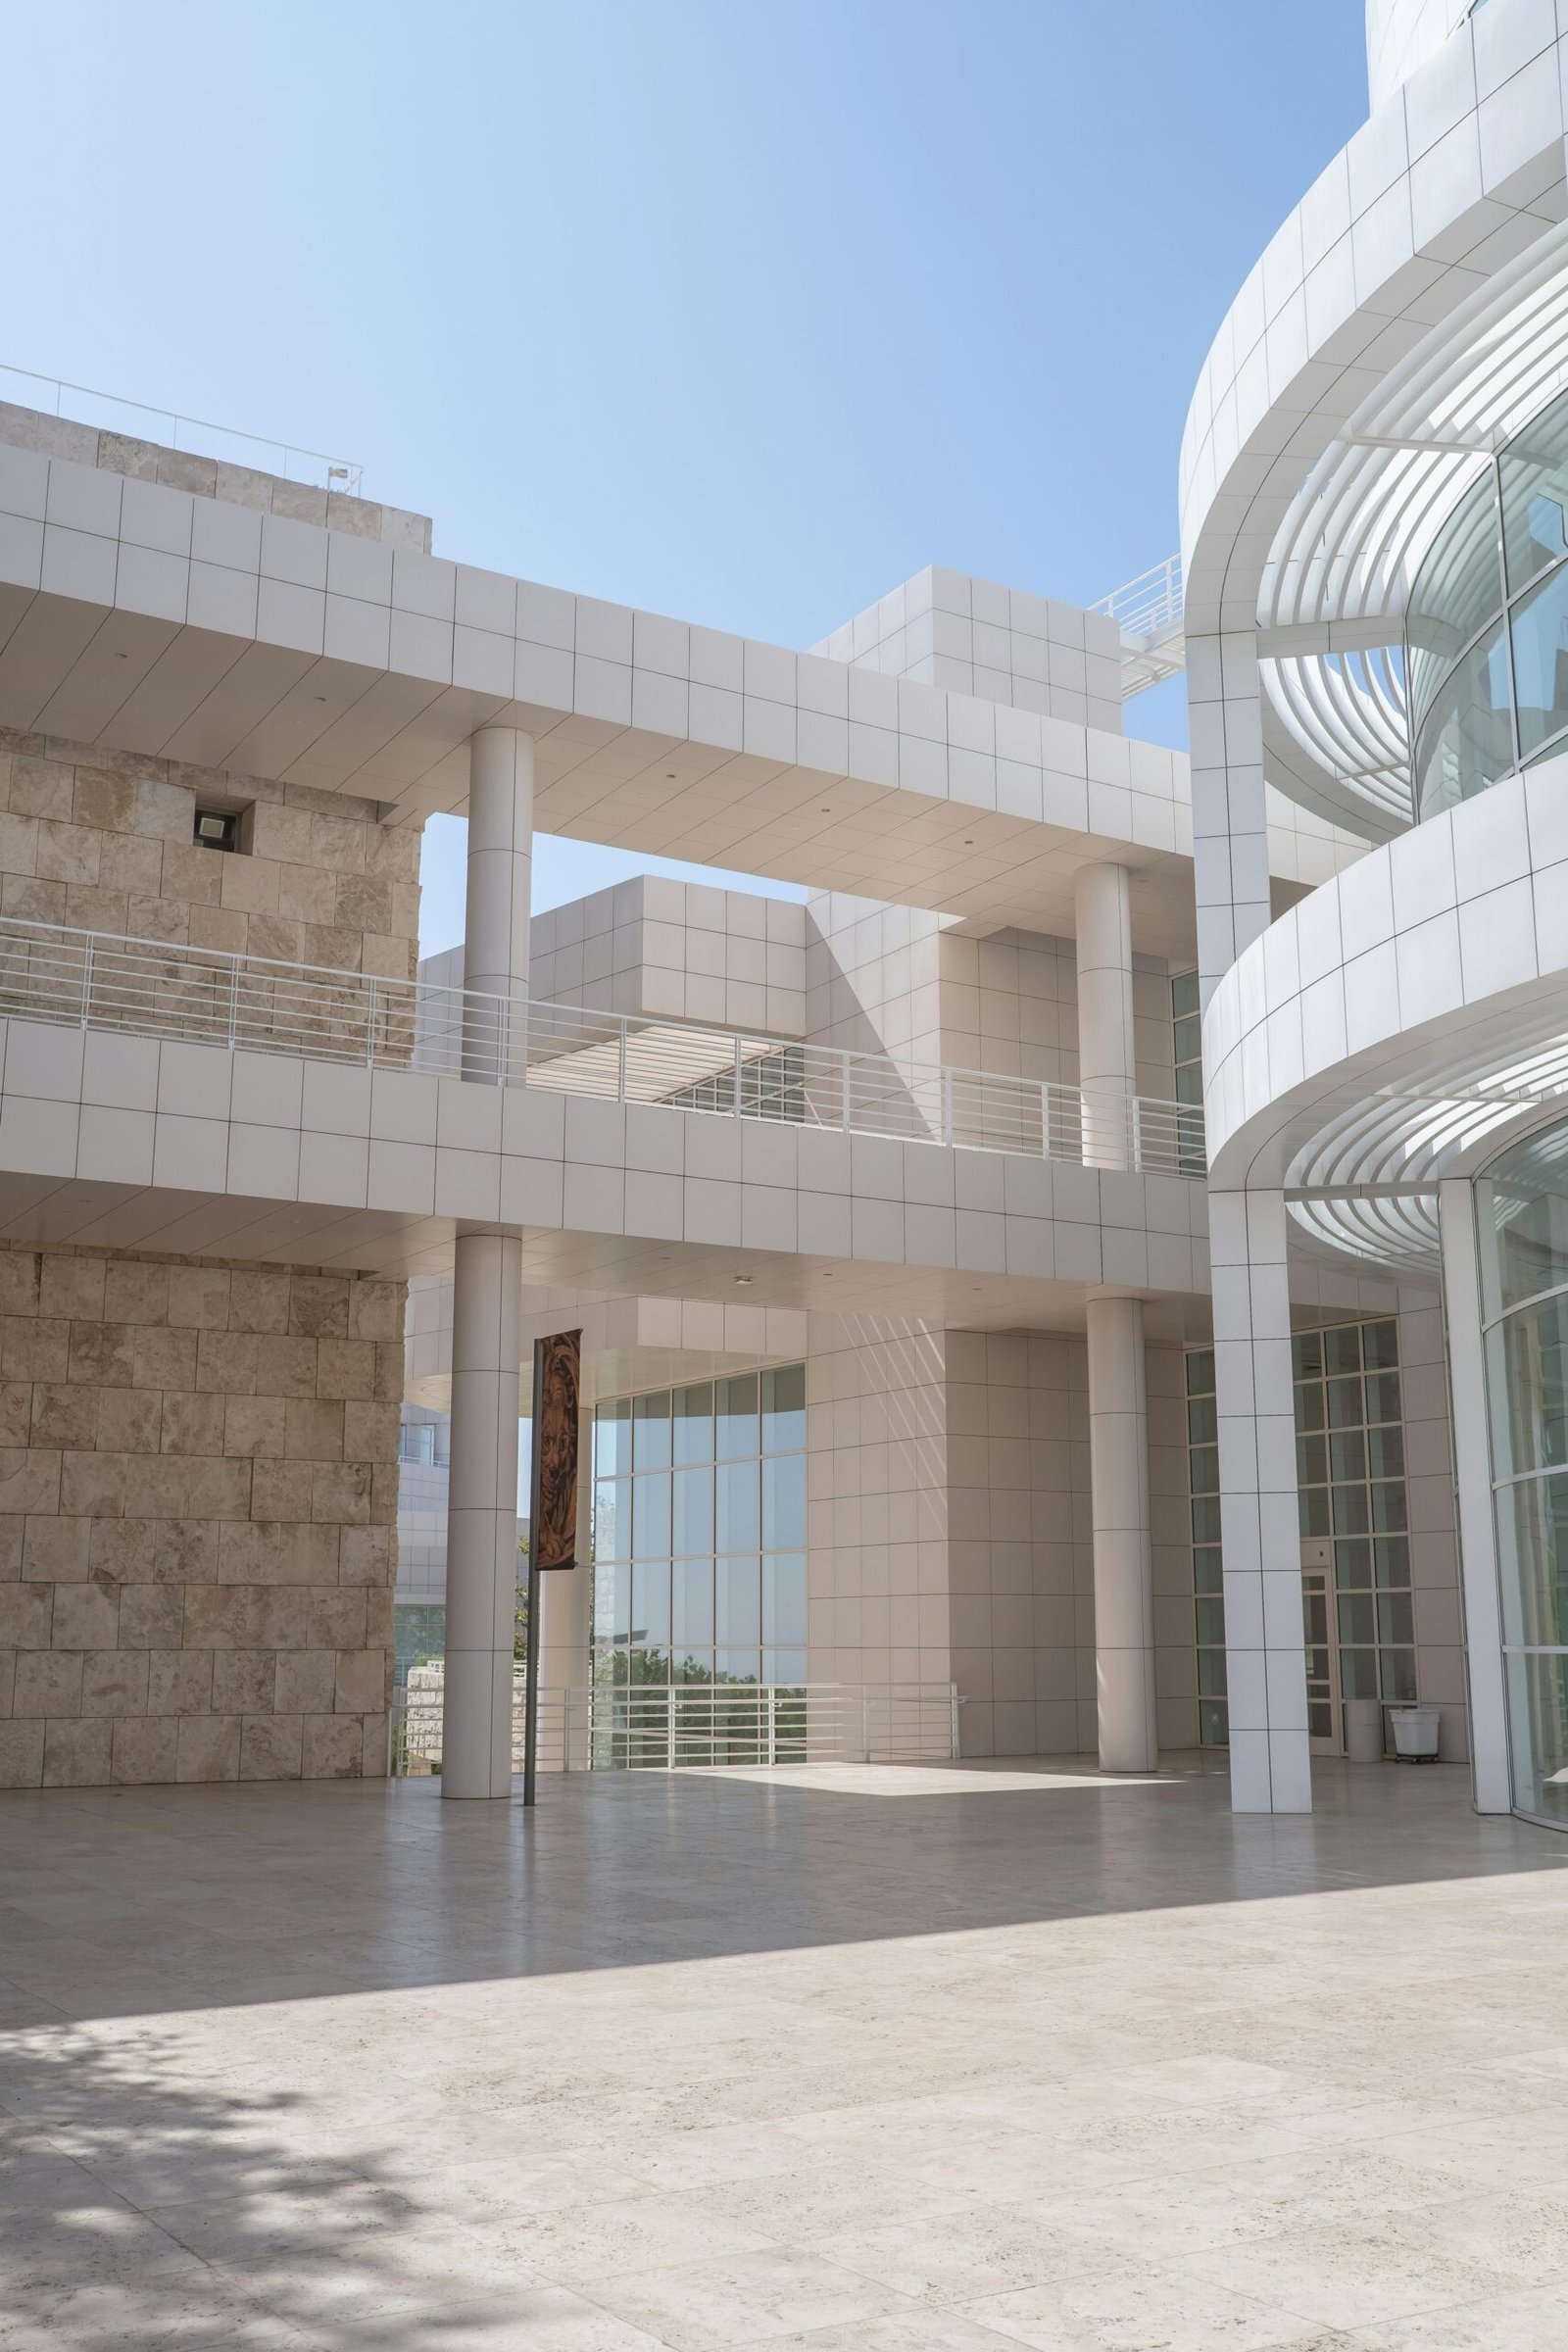 Exploring The Getty: A National Treasure in Los Angeles, California